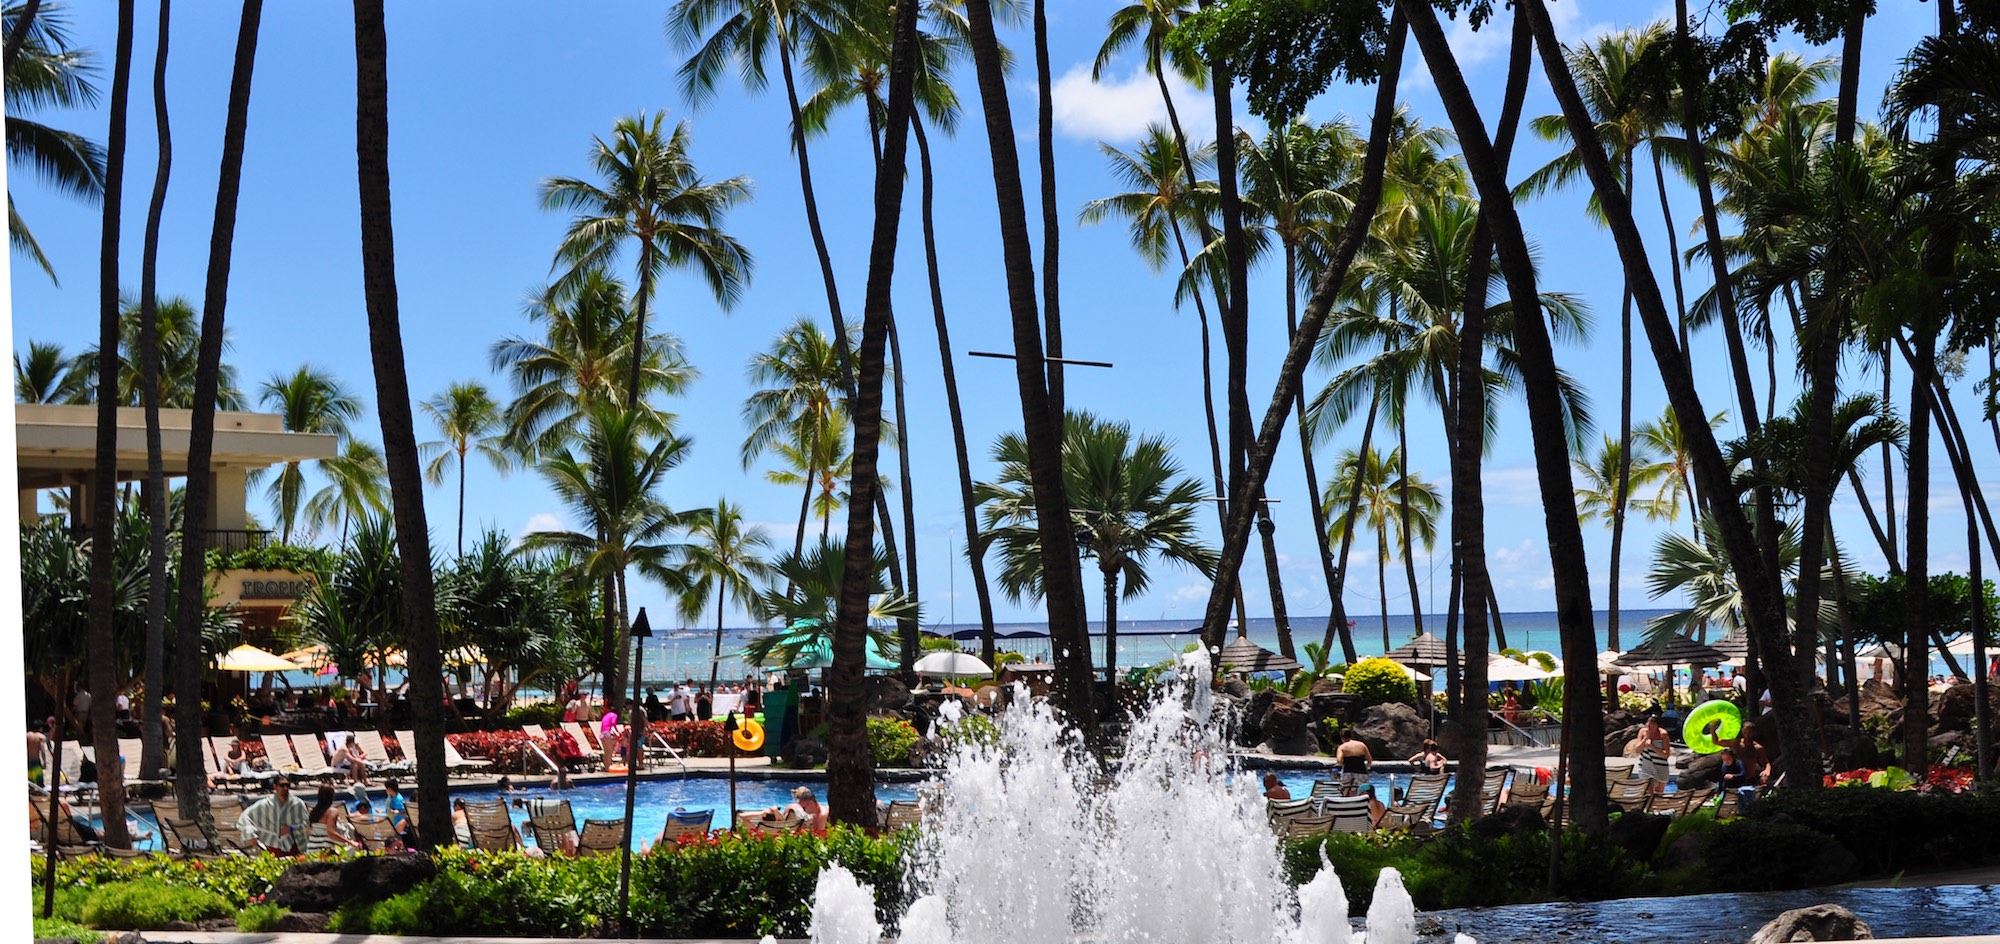 Hilton Kamaaina Rates & Special Discount Offers For Hawaii Local Residents